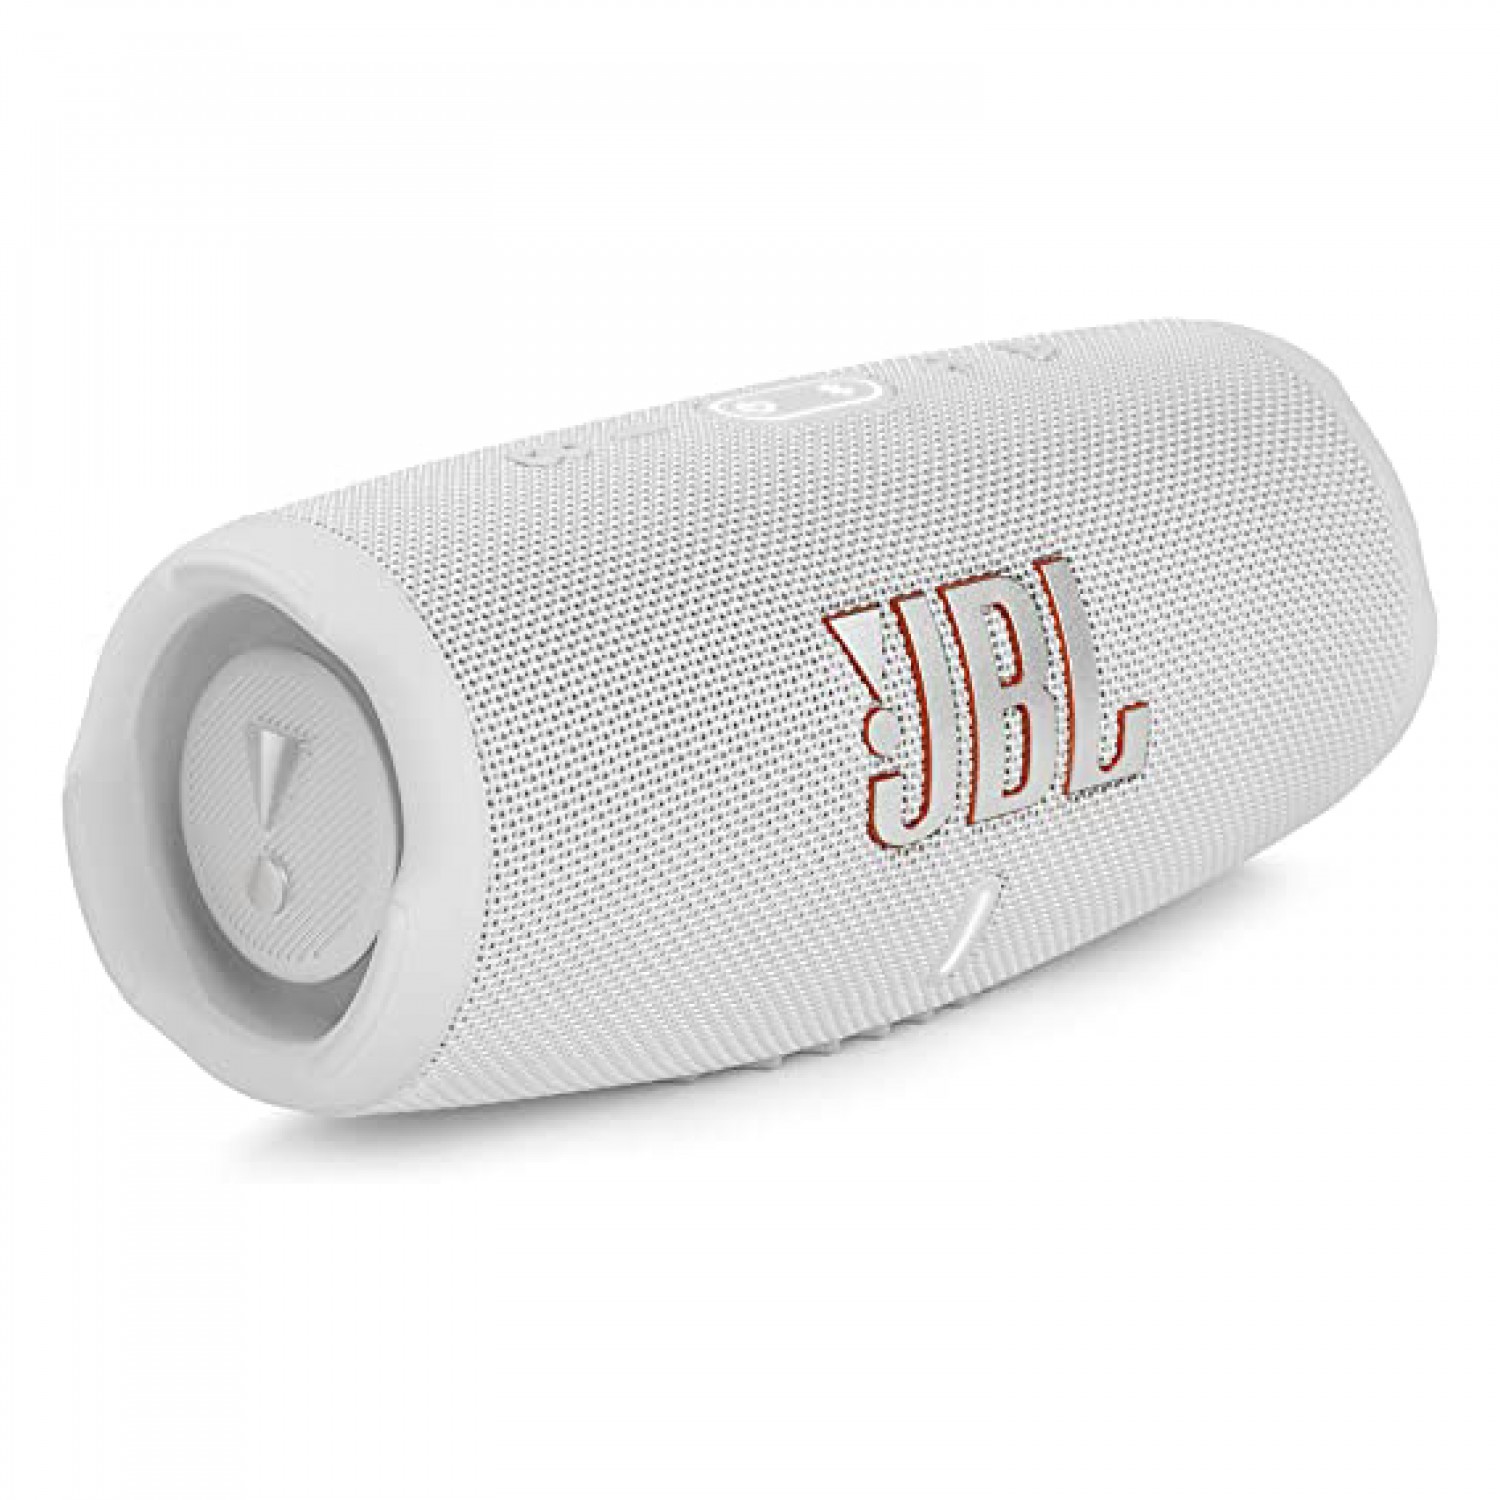 JBL Charge 5 - Speaker - for portable use - wireless - Bluetooth